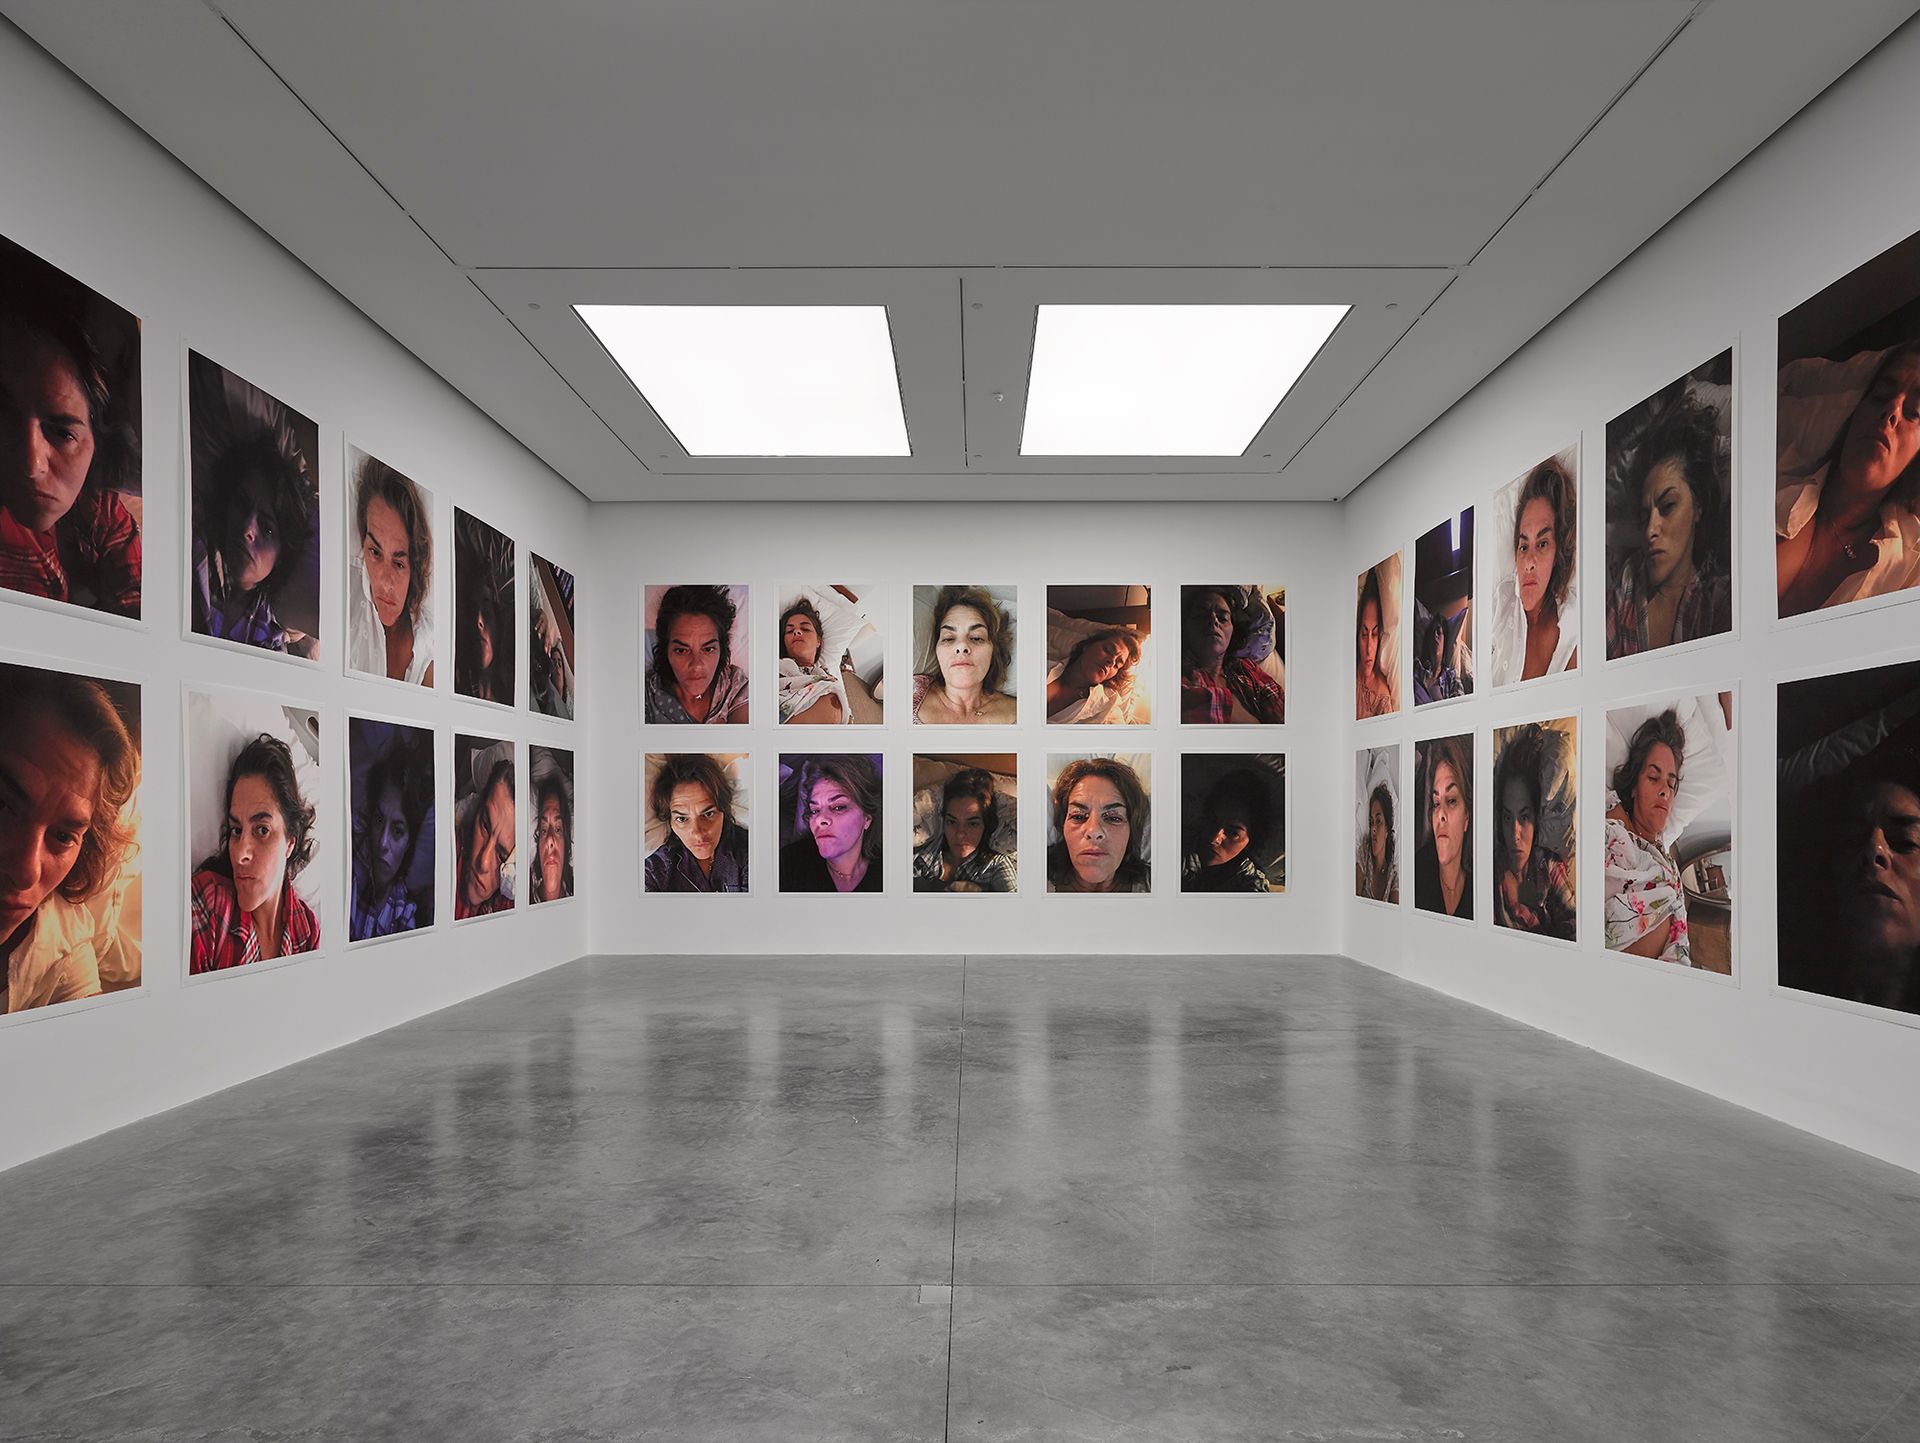 Installation view of Tracey Emin's show A Fortnight of Tears at White Cube Bermondsey, London © Tracey Emin. All rights reserved, DACS 2017. Photo © White Cube (Theo Christelis)